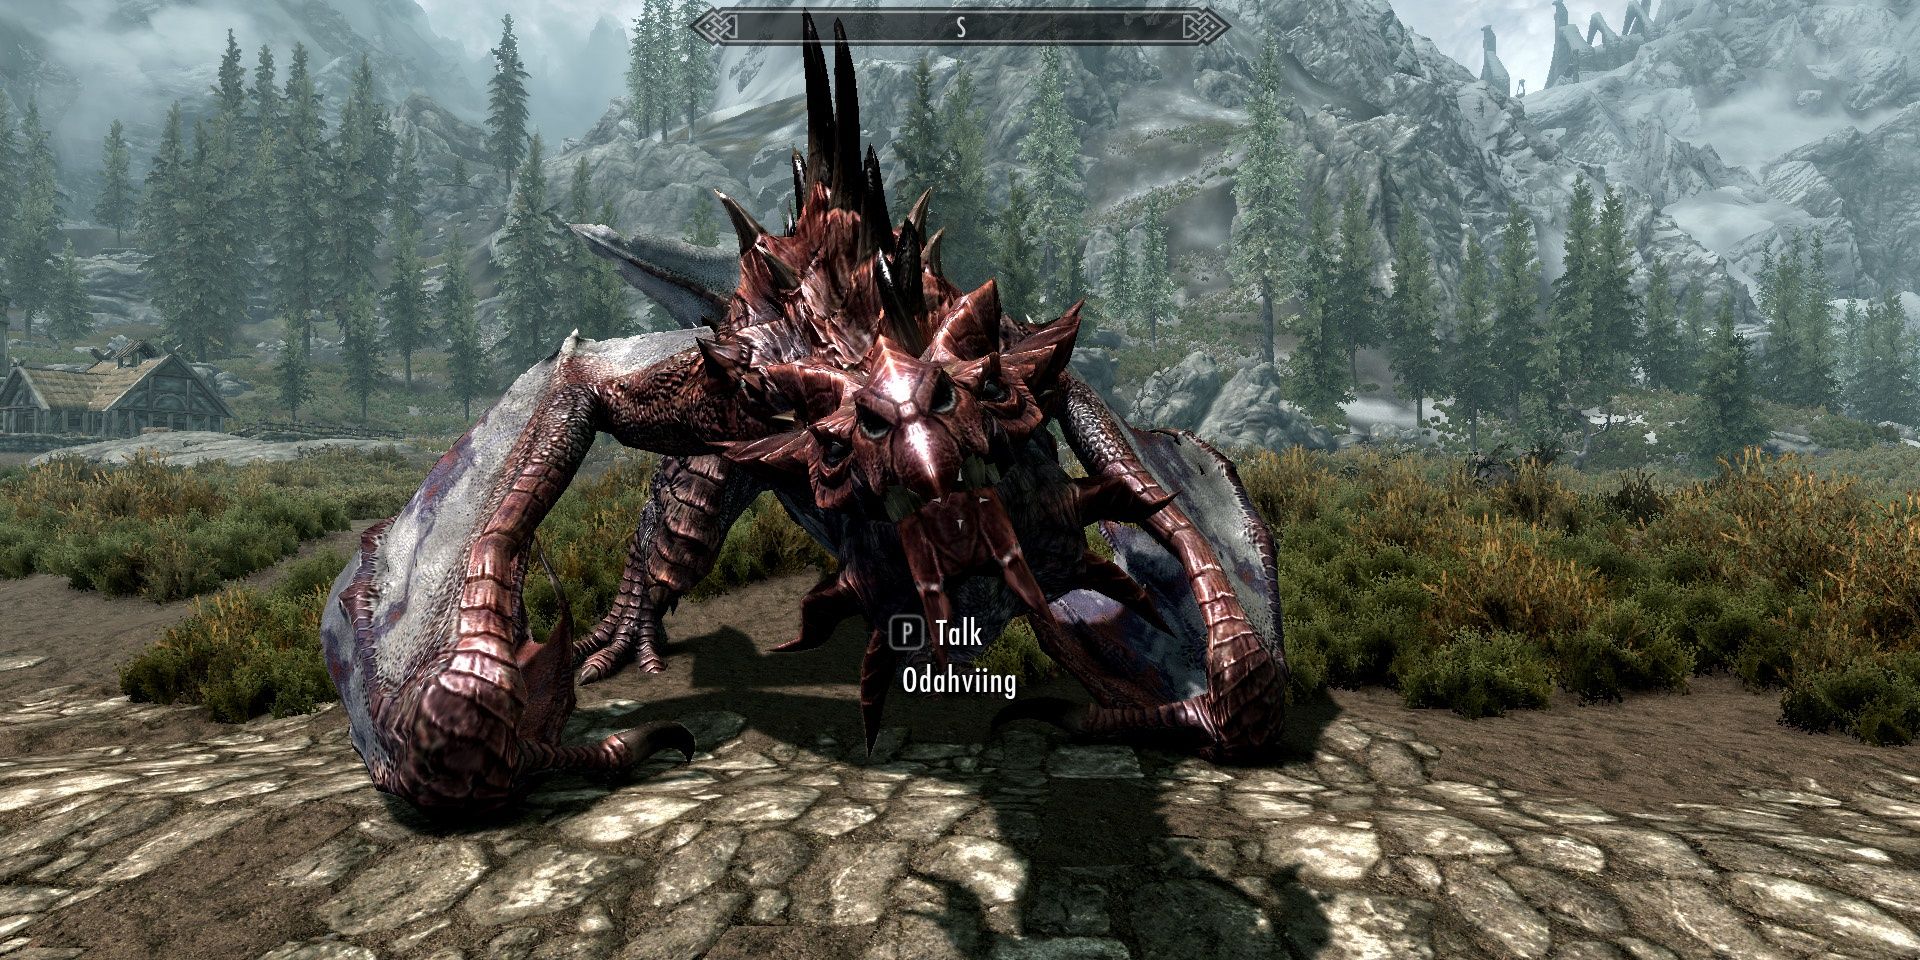 An in-game image from Skyrim of a dragon named Odahviing.